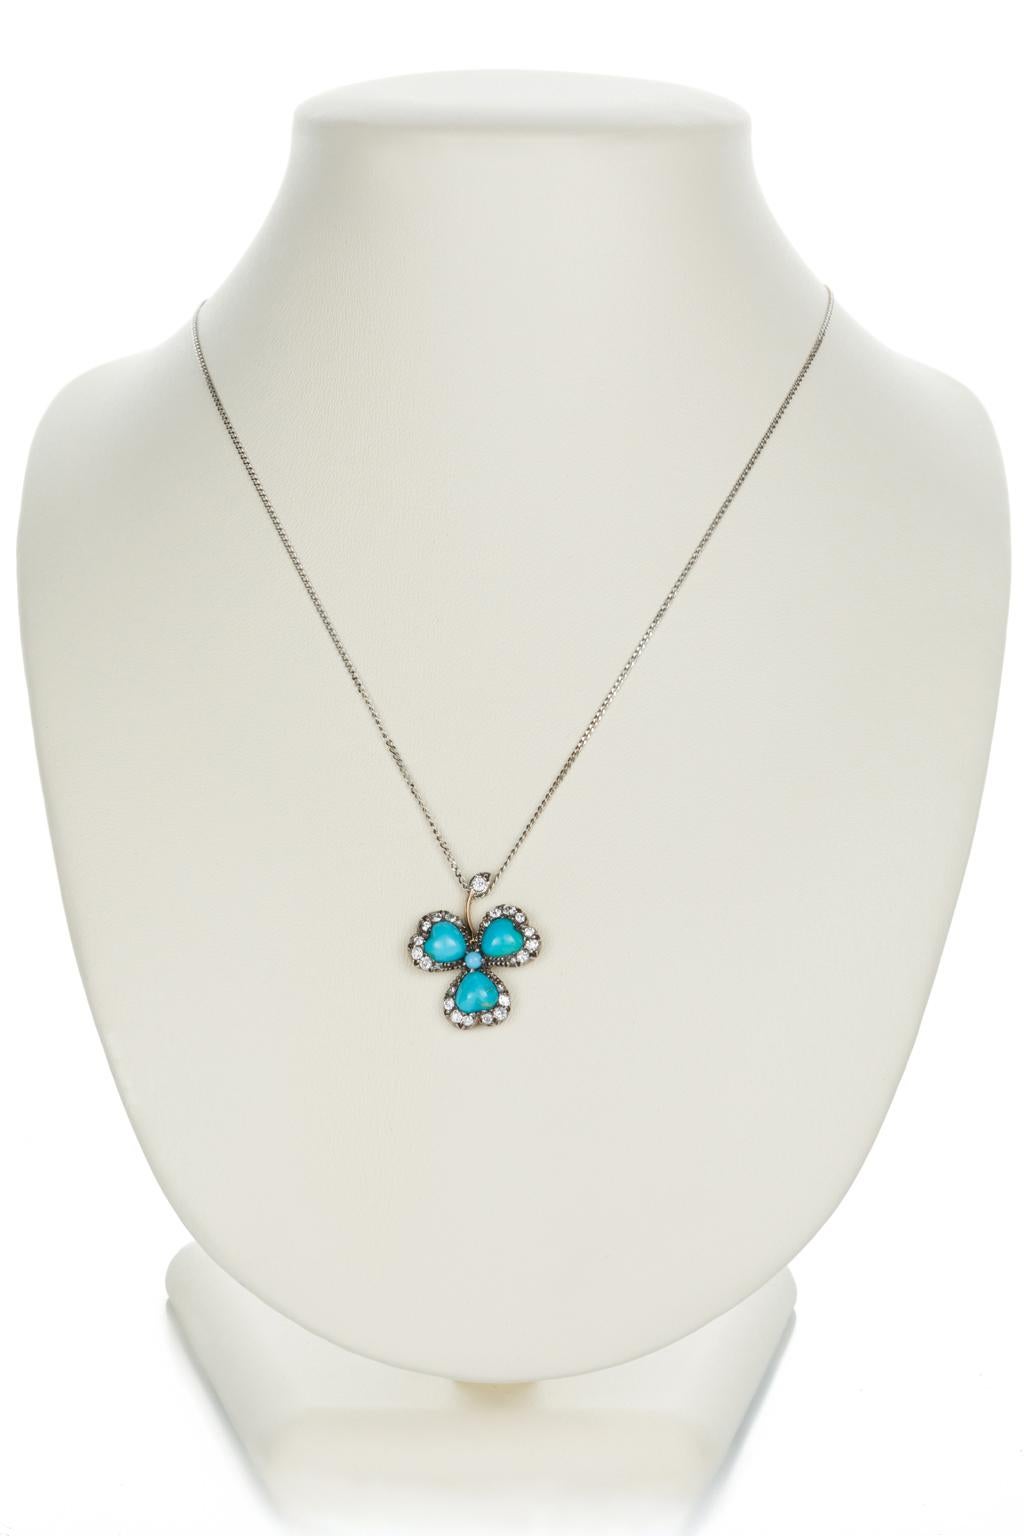 Women's Turquoise and Old Cut Diamond Three-Leaf Clover Pendant Necklace